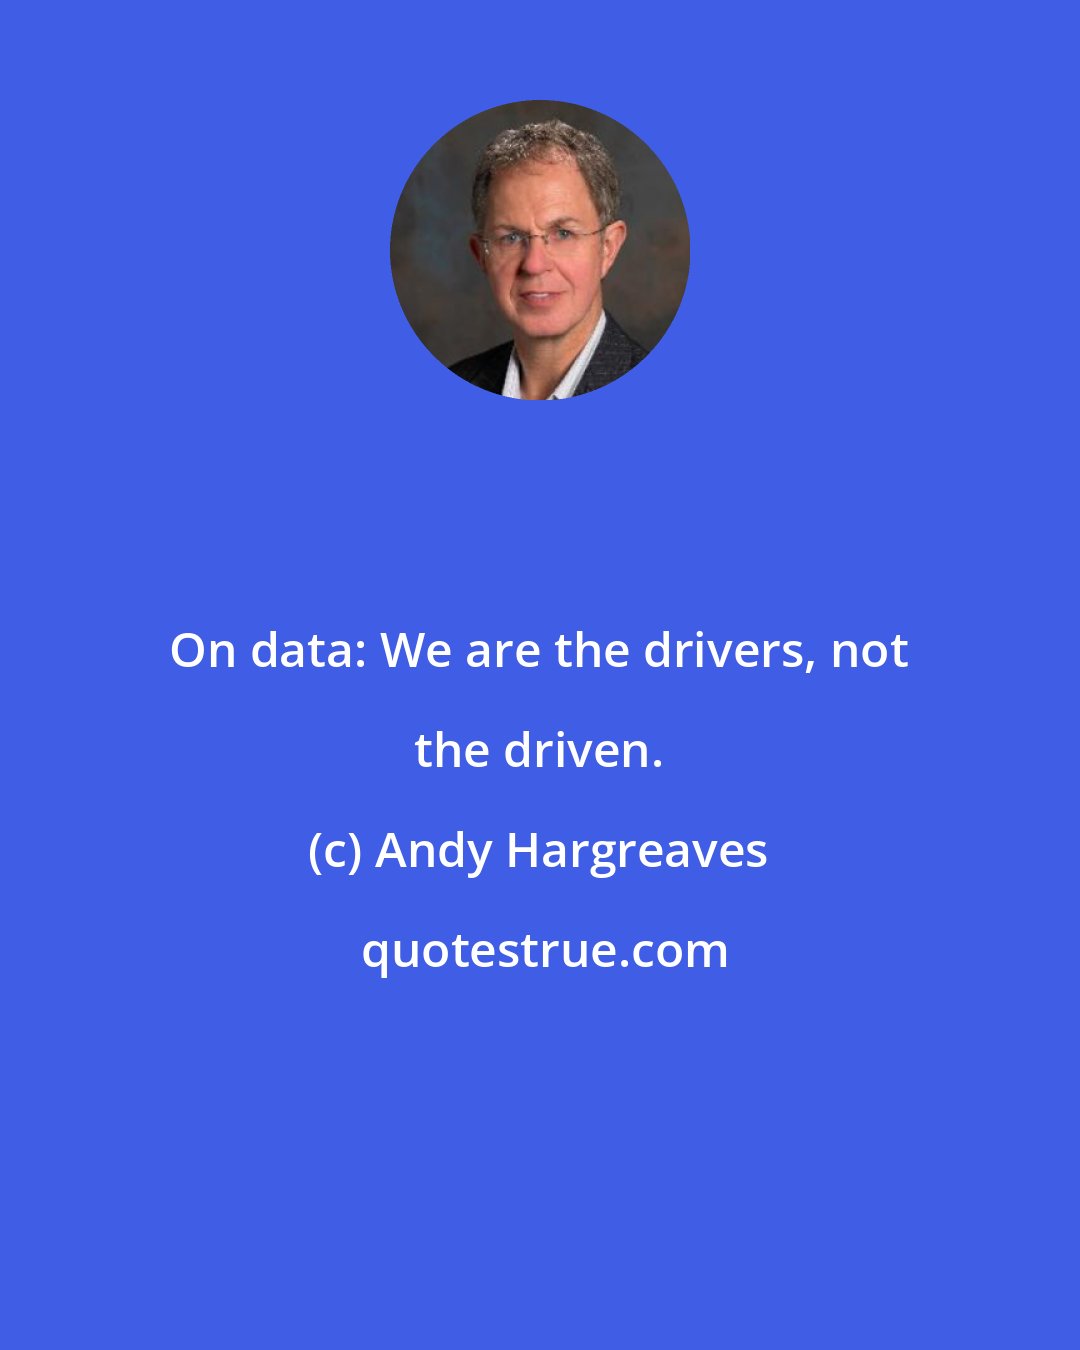 Andy Hargreaves: On data: We are the drivers, not the driven.